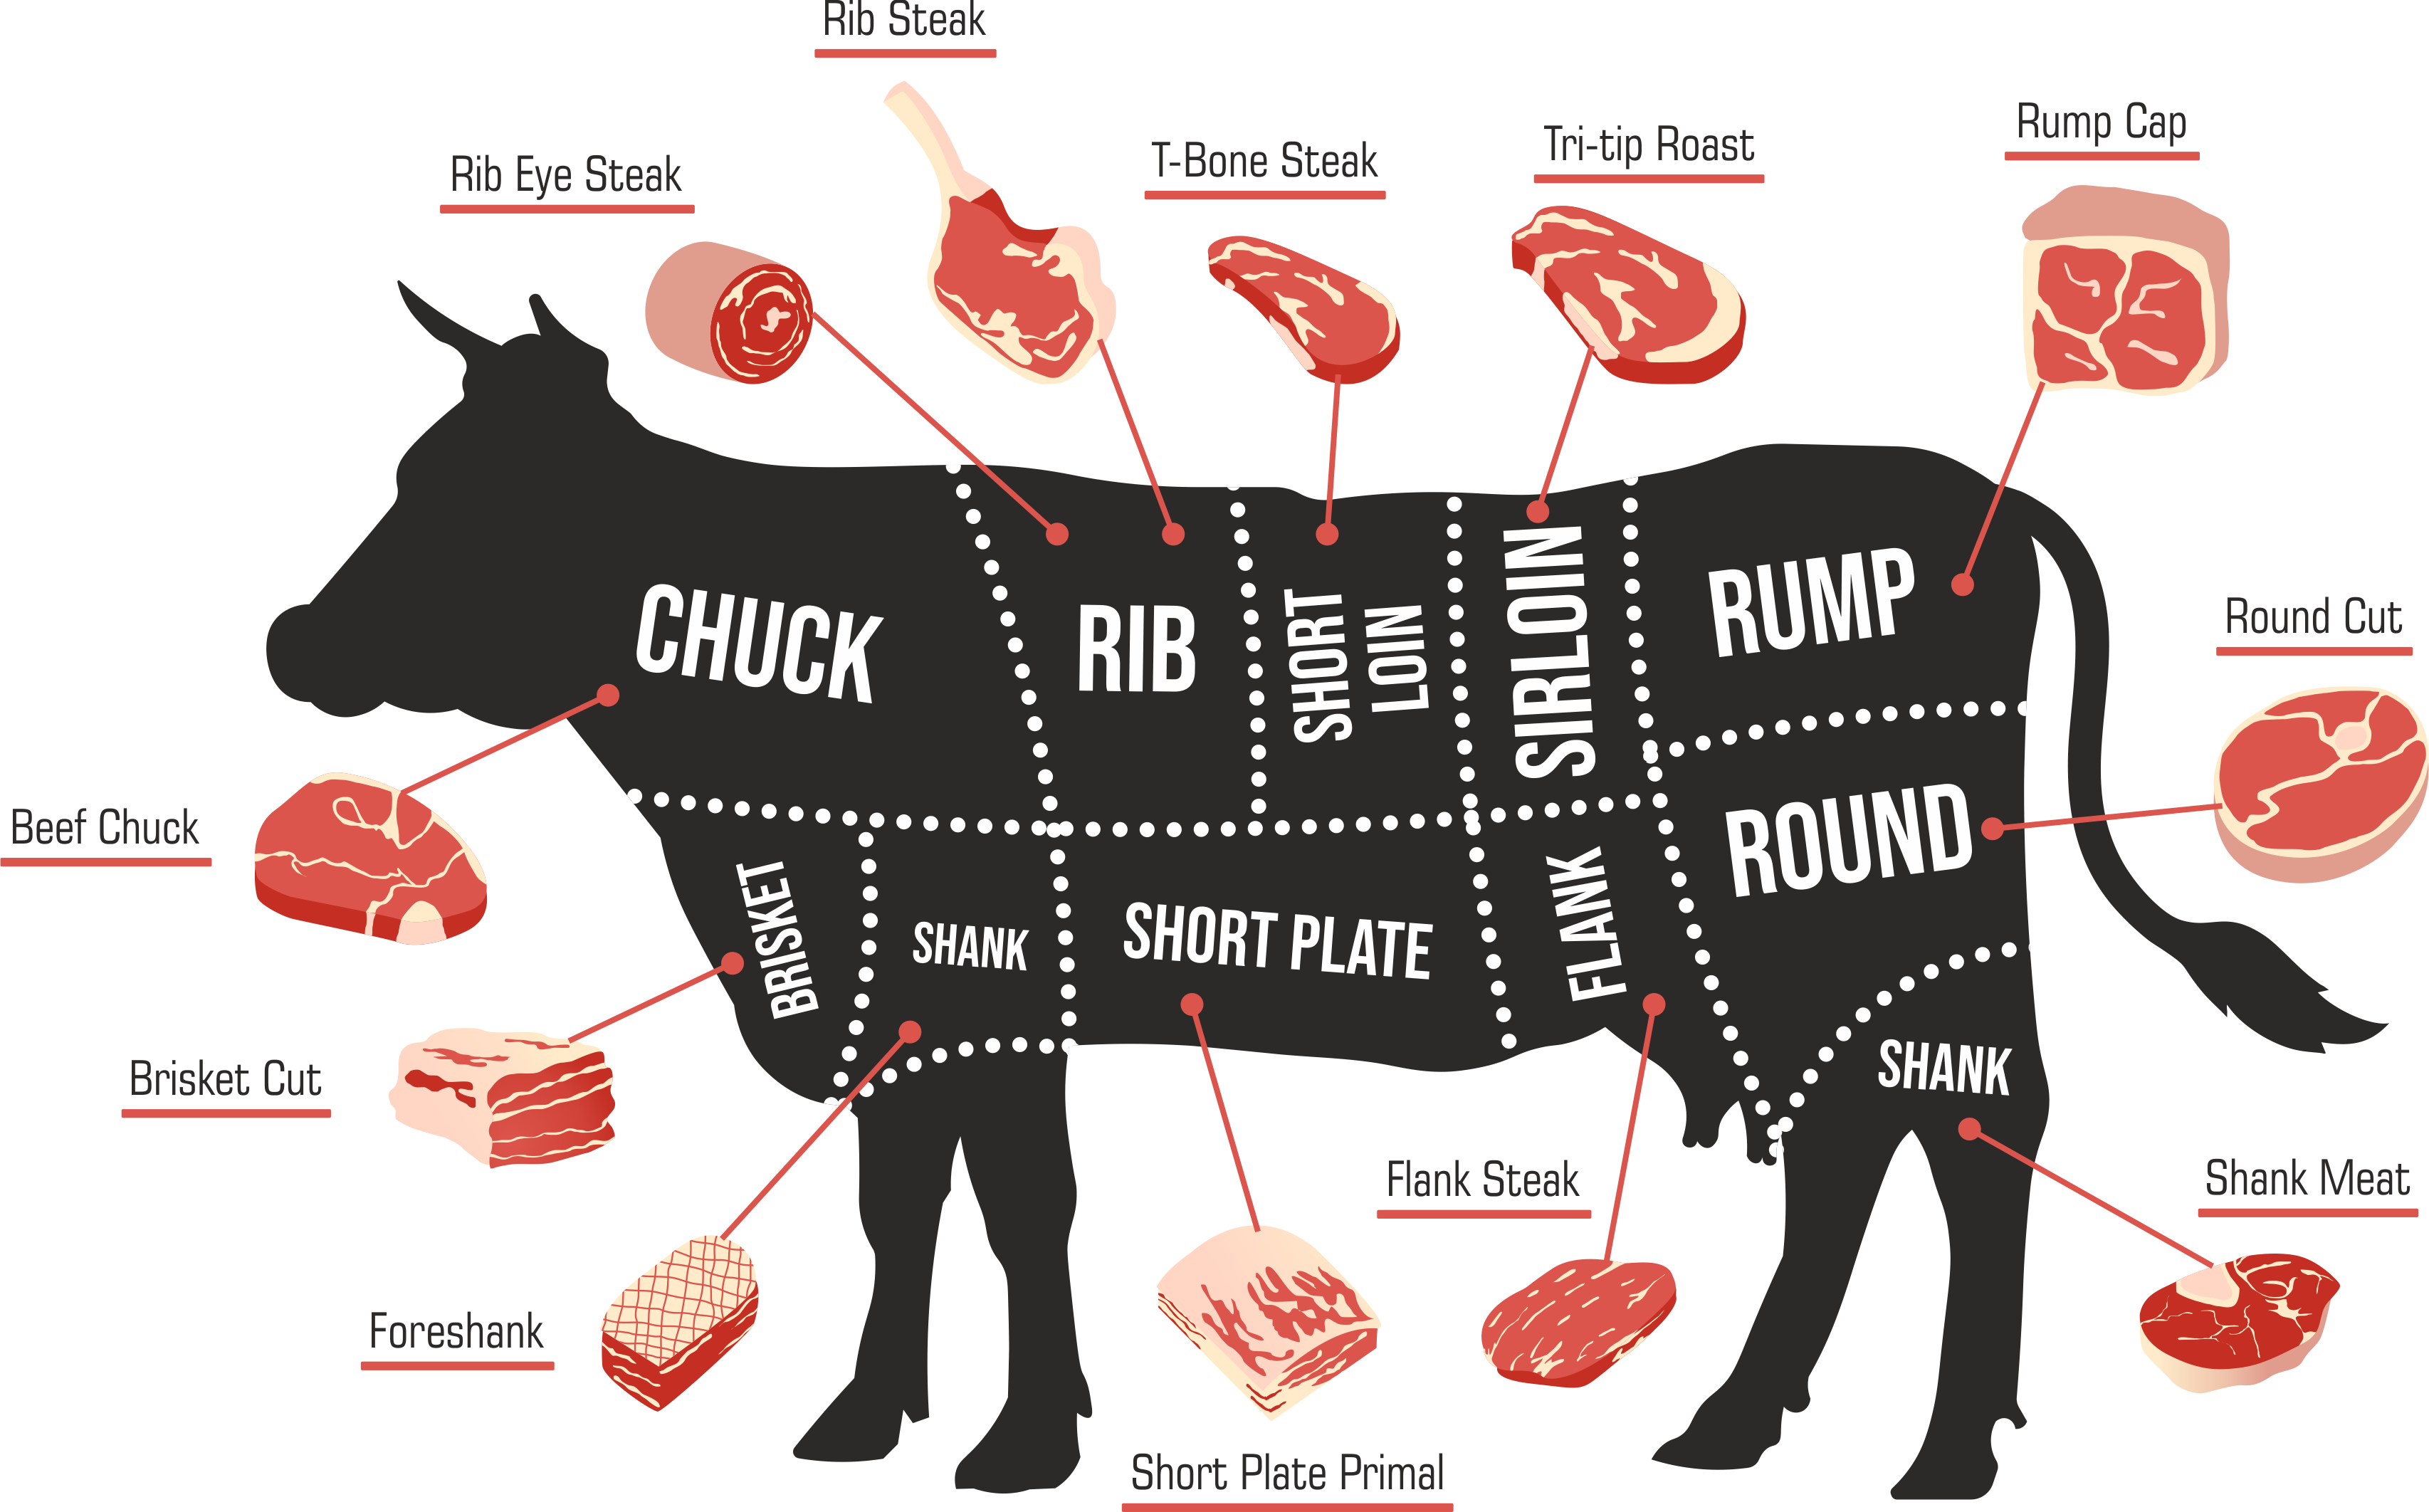 Prime Beef Cuts - A Comprehensive Guide for Professionals and